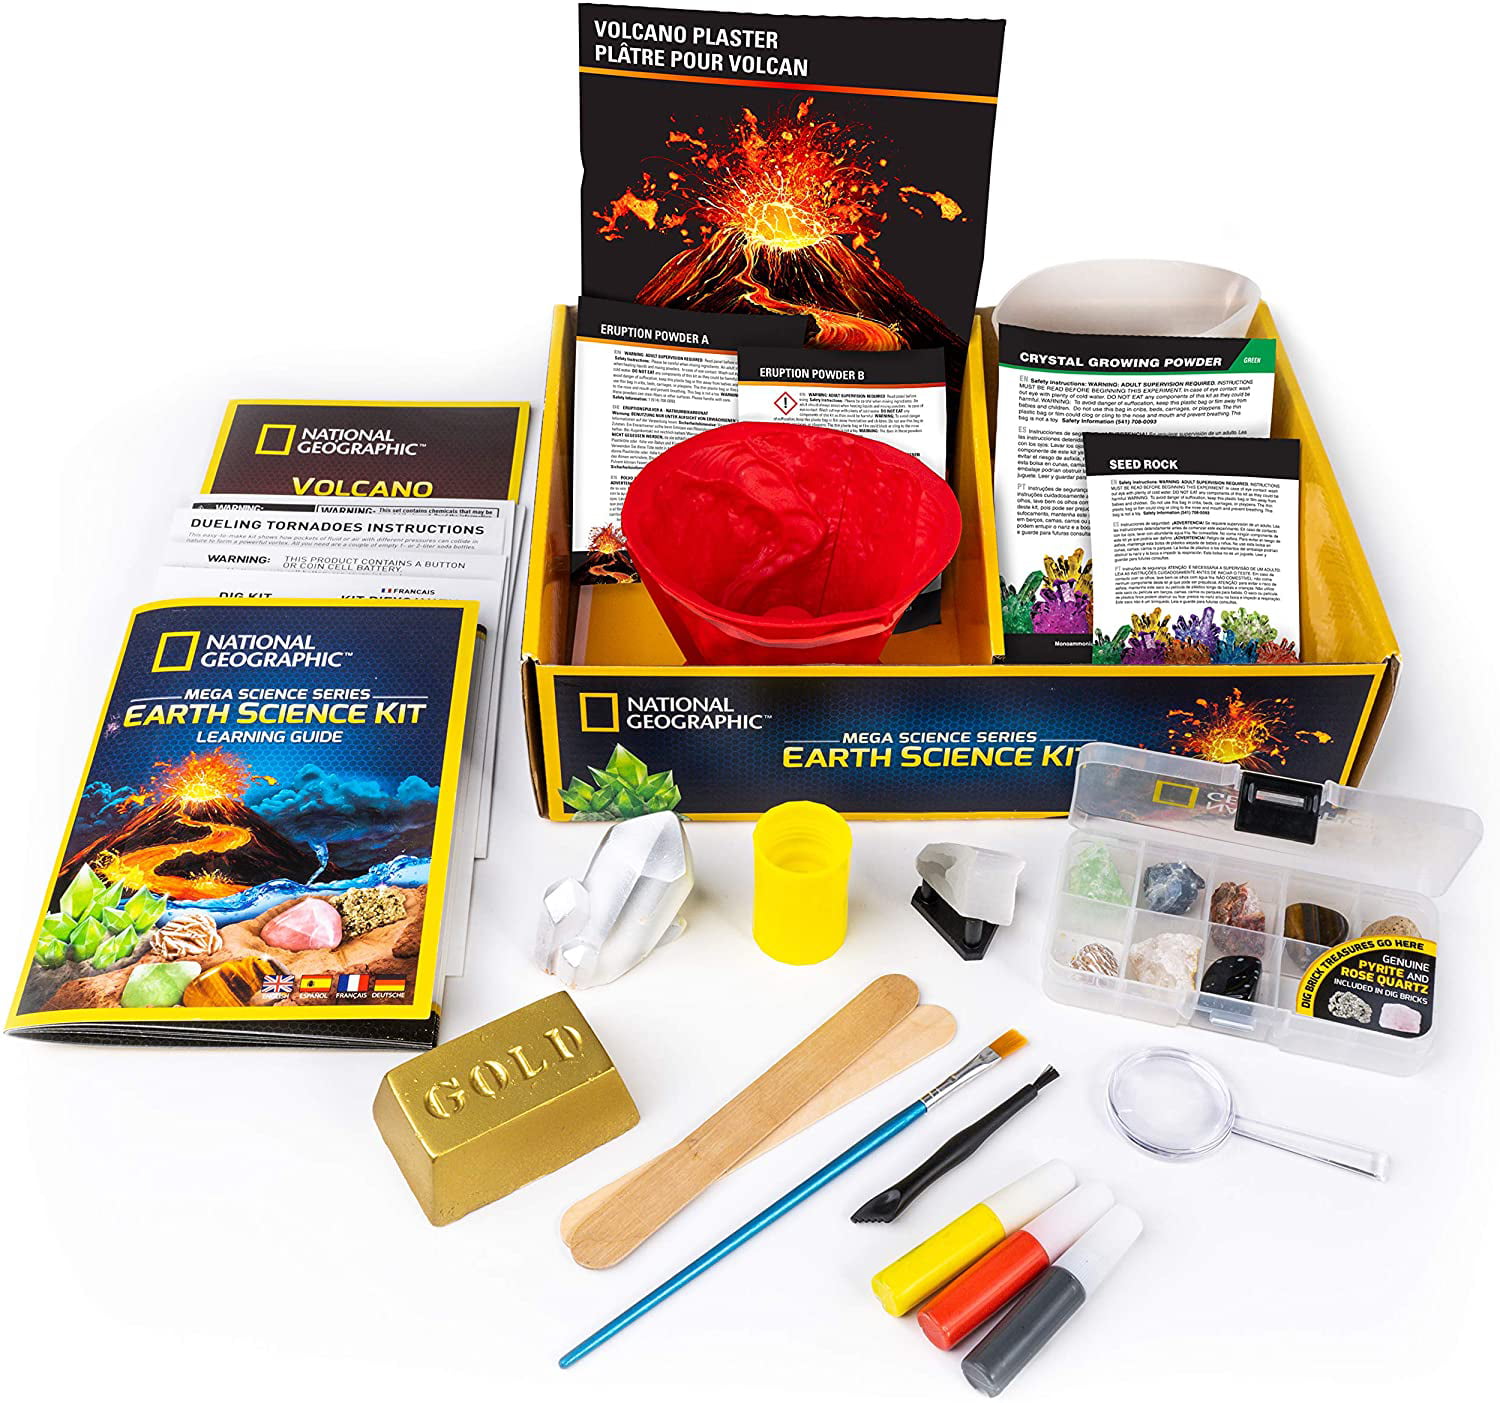 NATIONAL GEOGRAPHIC Earth Science Kit Over 15 Experiments Crystal Growing Kit 